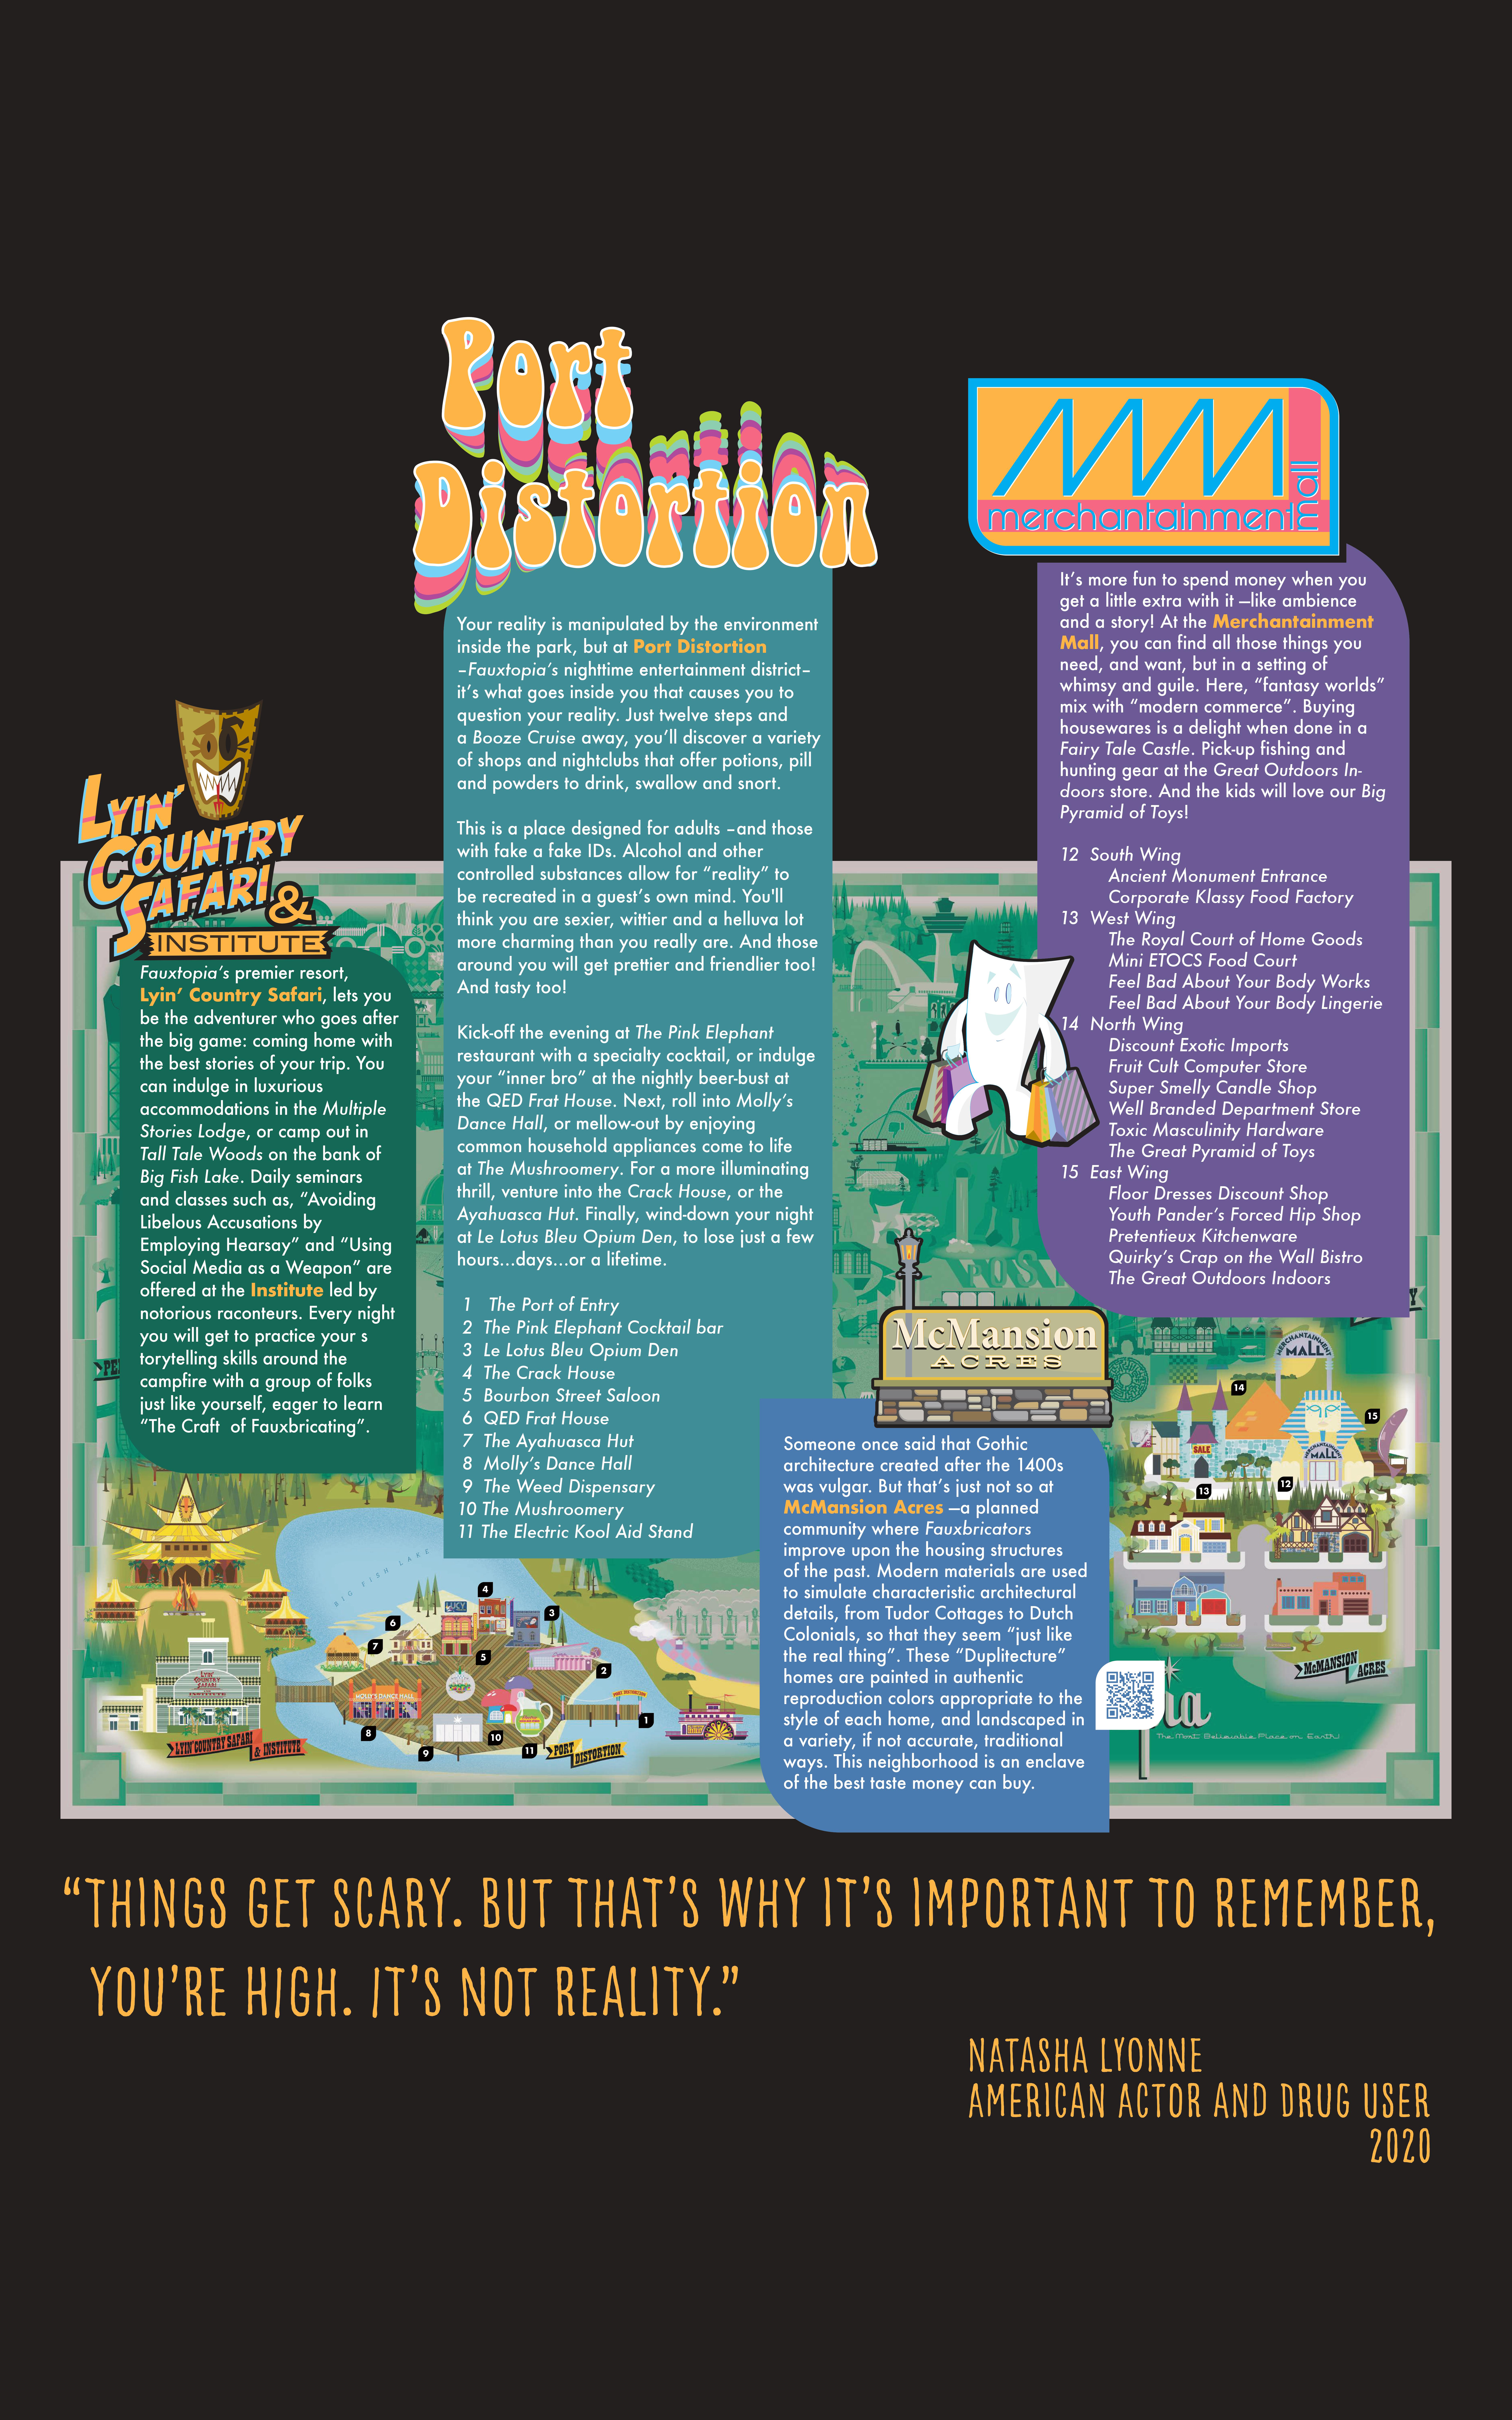 Image of map with text describing areas of map: "Things get scary. But that's why it's important to remember, you're high. It's not reality." -Natasha Lyonne, American Actor and Drug User, 2020  Lyin' Country Safari & Institute: Fauxtopiaʼs premier resort, Lyin’ Country Safari, lets you be the adventurer who goes after the big game: coming home with the best stories of your trip. You can indulge in luxurious accommodations in the Multiple Stories Lodge, or camp out in Tall Tale Woods on the bank of Big Fish Lake. Daily seminars and classes such as, “Avoiding Libelous Accusations by Employing Hearsay” and “Using Social Media as a Weapon” are offered at the Institute led by notorious raconteurs. Every night you will get to practice your s torytelling skills around the campfire with a group of folks just like yourself, eager to learn “The Craft of Fauxbricating”.  Port Distortion: Your reality is manipulated by the environment inside the park, but at Port Distortion –Fauxtopiaʼs nighttime entertainment district– itʼs what goes inside you that causes you to question your reality. Just twelve steps and a Booze Cruise away, youʼll discover a variety of shops and nightclubs that offer potions, pill and powders to drink, swallow and snort. This is a place designed for adults –and those with fake a fake IDs. Alcohol and other controlled substances allow for “reality” to be recreated in a guestʼs own mind. You'll think you are sexier, wittier and a helluva lot more charming than you really are. And those around you will get prettier and friendlier too! And tasty too! Kick-off the evening at The Pink Elephant restaurant with a specialty cocktail, or indulge your “inner bro” at the nightly beer-bust at the QED Frat House. Next, roll into Mollyʼs Dance Hall, or mellow-out by enjoying common household appliances come to life at The Mushroomery. For a more illuminating thrill, venture into the Crack House, or the Ayahuasca Hut. Finally, wind-down your night at Le Lotus Bleu Opium Den, to lose just a few hours…days…or a lifetime. 1 The Port of Entry 2 The Pink Elephant Cocktail bar 3 Le Lotus Bleu Opium Den 4 The Crack House 5 Bourbon Street Saloon 6 QED Frat House 7 The Ayahuasca Hut 8 Mollyʼs Dance Hall 9 The Weed Dispensary 10 The Mushroomery 11 The Electric Kool Aid Stand  McMansion Acres: Someone once said that Gothic architecture created after the 1400s was vulgar. But thatʼs just not so at McMansion Acres —a planned community where Fauxbricators improve upon the housing structures of the past. Modern materials are used to simulate characteristic architectural details, from Tudor Cottages to Dutch Colonials, so that they seem “just like the real thing”. These “Duplitecture” homes are painted in authentic reproduction colors appropriate to the style of each home, and landscaped in a variety, if not accurate, traditional ways. This neighborhood is an enclave of the best taste money can buy.  Merchantainment Mall: Itʼs more fun to spend money when you get a little extra with it —like ambience and a story! At the Merchantainment Mall, you can find all those things you need, and want, but in a setting of whimsy and guile. Here, “fantasy worlds” mix with “modern commerce”. Buying housewares is a delight when done in a Fairy Tale Castle. Pick-up fishing and hunting gear at the Great Outdoors Indoors store. And the kids will love our Big Pyramid of Toys! 12 South Wing Ancient Monument Entrance Corporate Klassy Food Factory 13 West Wing The Royal Court of Home Goods Mini ETOCS Food Court Feel Bad About Your Body Works Feel Bad About Your Body Lingerie 14 North Wing Discount Exotic Imports Fruit Cult Computer Store Super Smelly Candle Shop Well Branded Department Store Toxic Masculinity Hardware The Great Pyramid of Toys 15 East Wing Floor Dresses Discount Shop Youth Panderʼs Forced Hip Shop Pretentieux Kitchenware Quirkyʼs Crap on the Wall Bistro The Great Outdoors Indoors